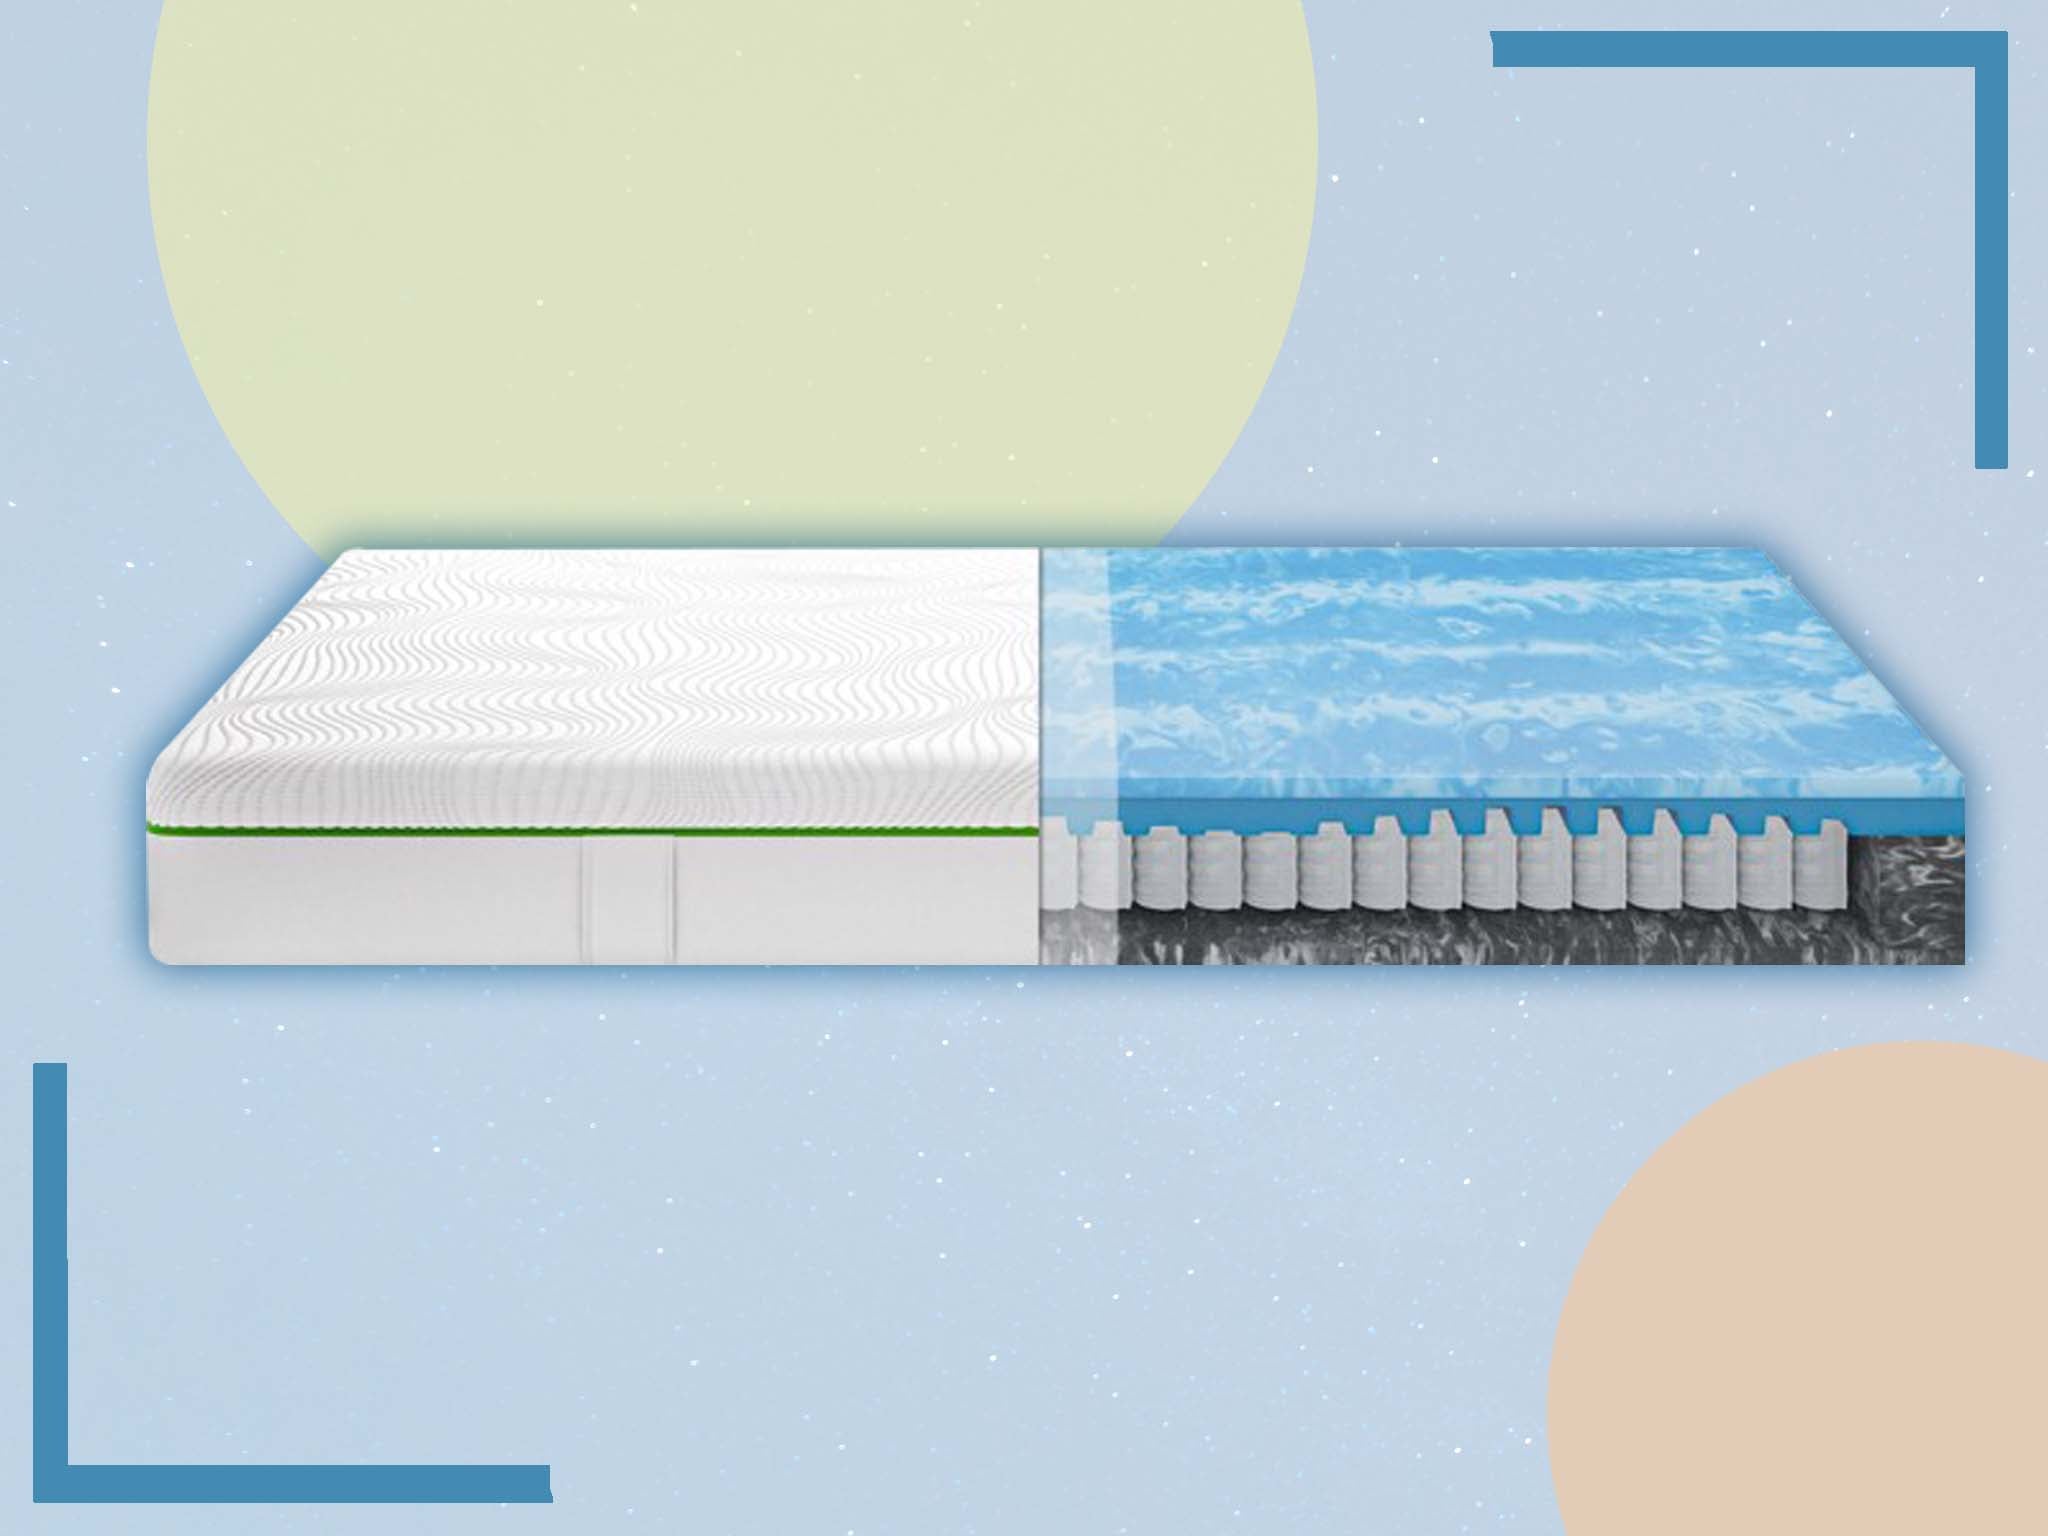 The hybrid mattress is made of foam and coils, providing the best of both worlds